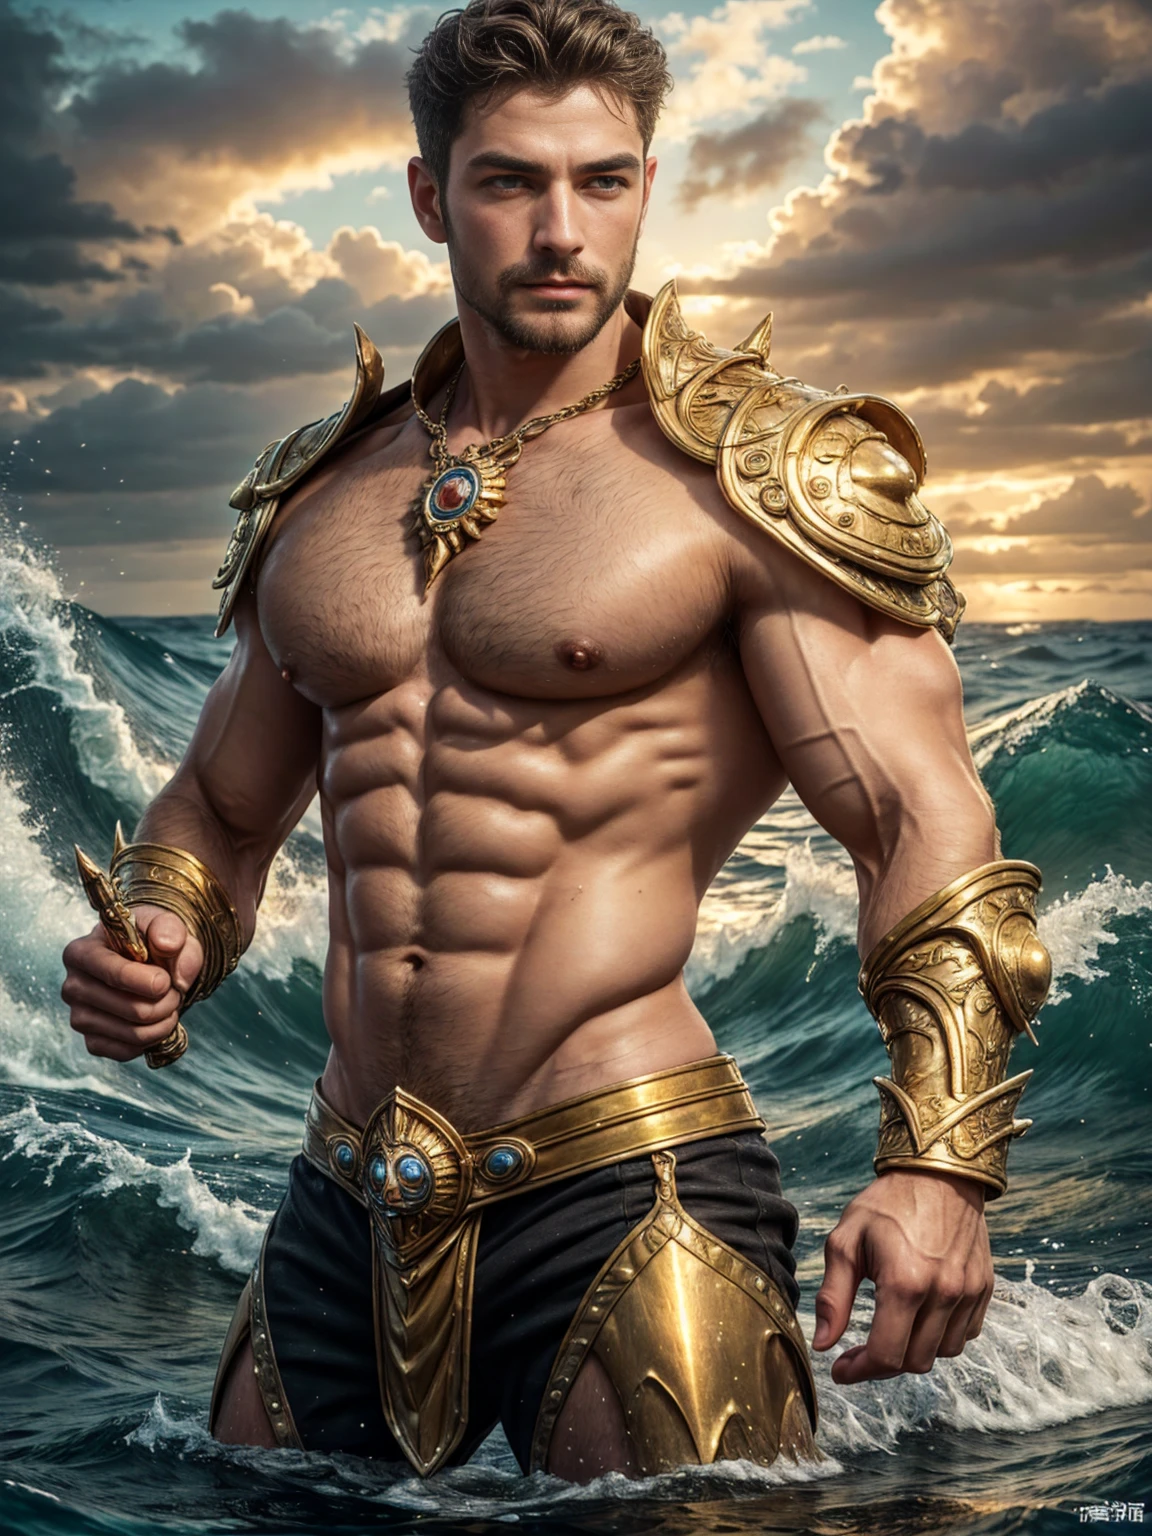 majestic image of Poseidon, Elegant golden hair！Surrounded by exotic marine life and colorful corals. On the hand, Holding a shining trident, Symbolizing his power over the ocean. （Extremely gorgeous ancient Roman gardens！）vestments（（（pearls！sea shell！diamond！garments）））Huge waves and foam create a majestic stormy environment. (Best quality,Photorealistic),(dark,feels) （light）, One guy,Detailed blue eyes, Smaller headasculine and strong,[ rigidly defined abs ]!!Gorgeous background（（Very detailed CG unified 8k wallpaper，（tmasterpiece），（Best quality），（ultra - detailed），（ultra real photo），Gorgeous background！（best character detail：1.36），Movie poster texture！full bodyesbian！profesional lighting，the golden ratio,[:(Have a delicate face:1.2)（（（Weapons in hand：1.8））），（（Unintentionally exposing chest muscles））Handsome Cominan（closeup portrait！)）showing off his hairy pecs。（Show hairy chest muscles），），(short mustache）Show furry and muscular eyes，）headspace！Charming and serious look，（Handsome men，handsome posture，Perfect body anatomy，Beautiful man face detail，，perfect hand！